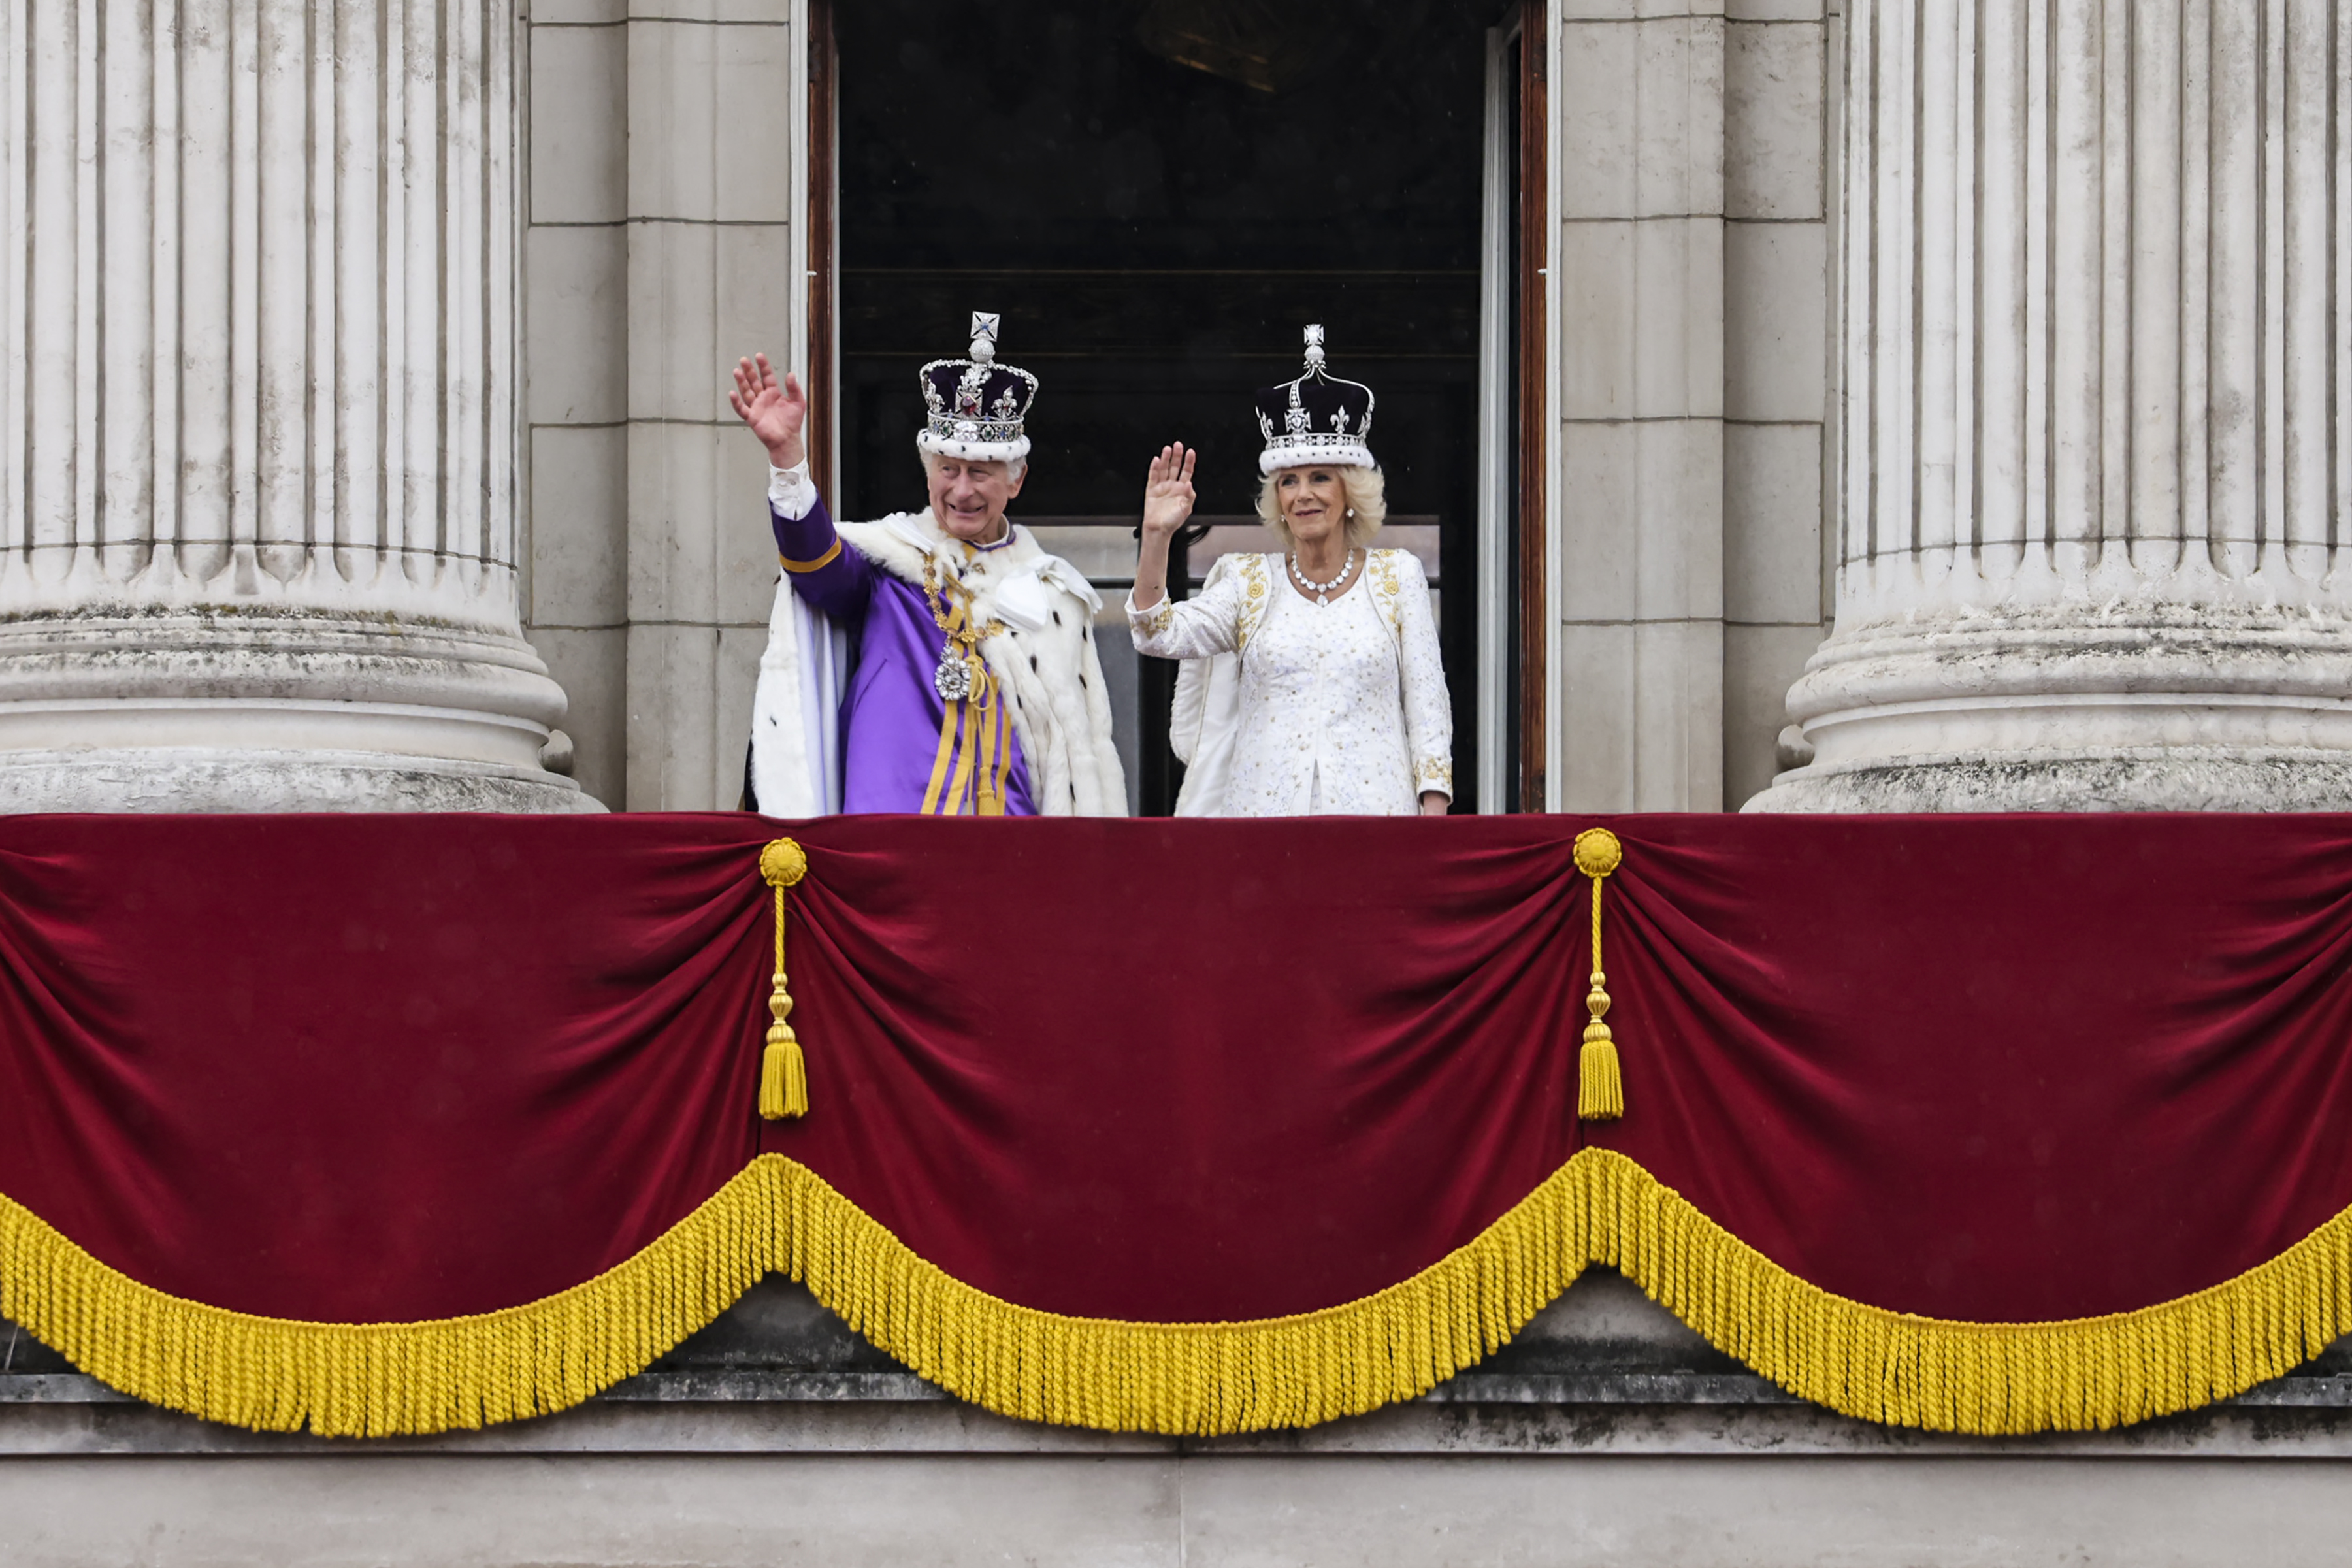 perfect view of the newly crowned King and Queen on Buckingham Palace balcony